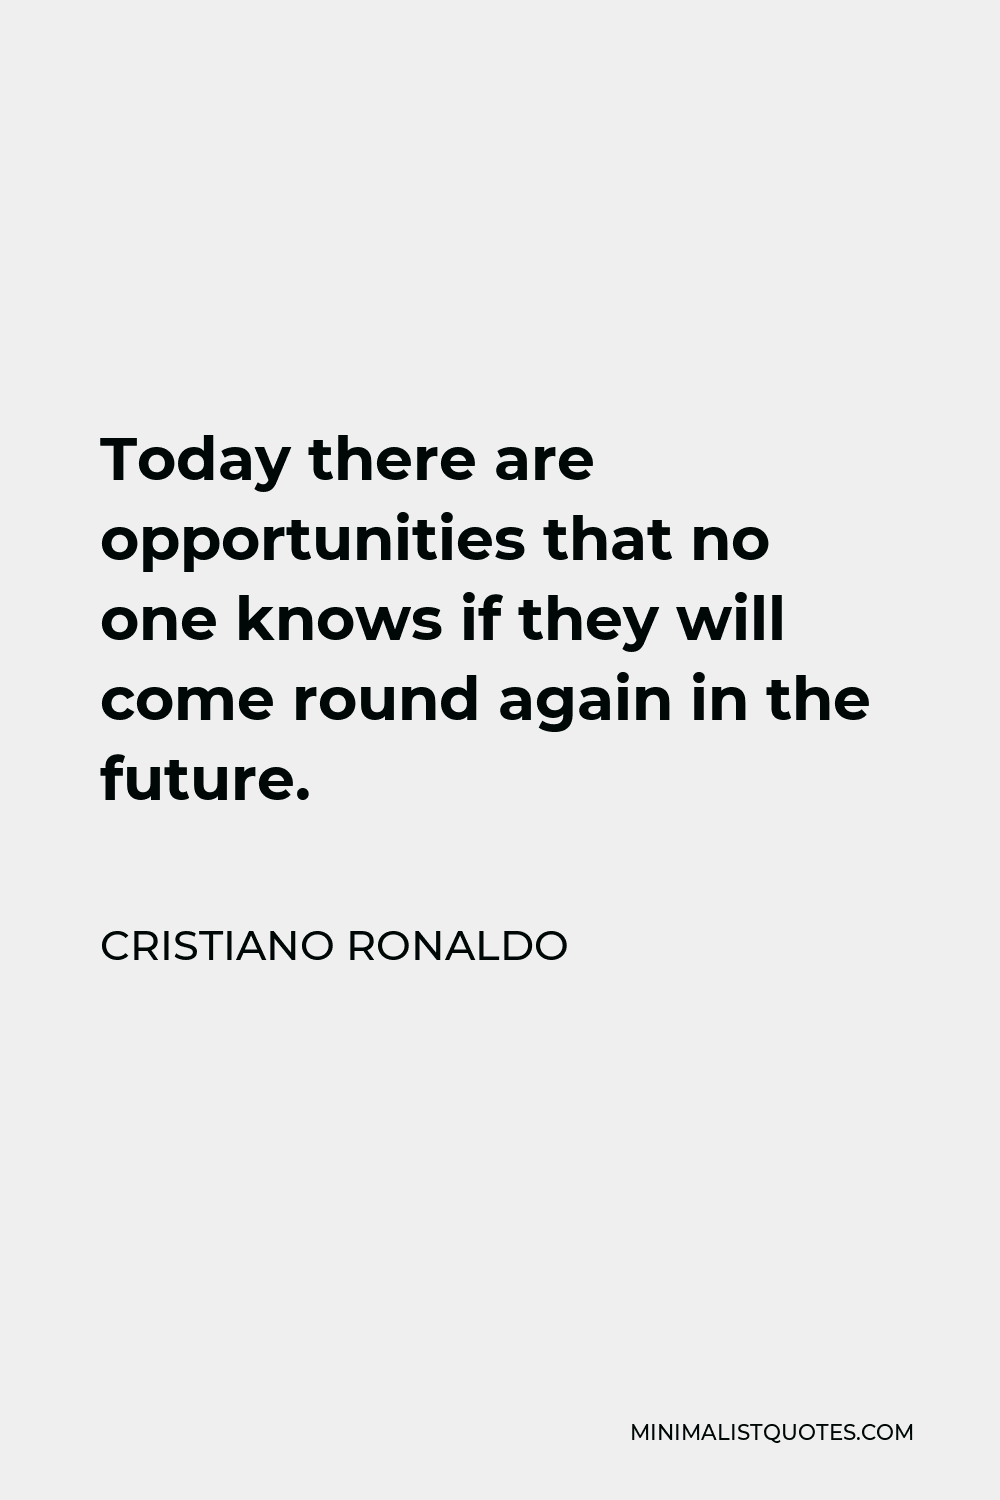 Cristiano Ronaldo Quote - Today there are opportunities that no one knows if they will come round again in the future.